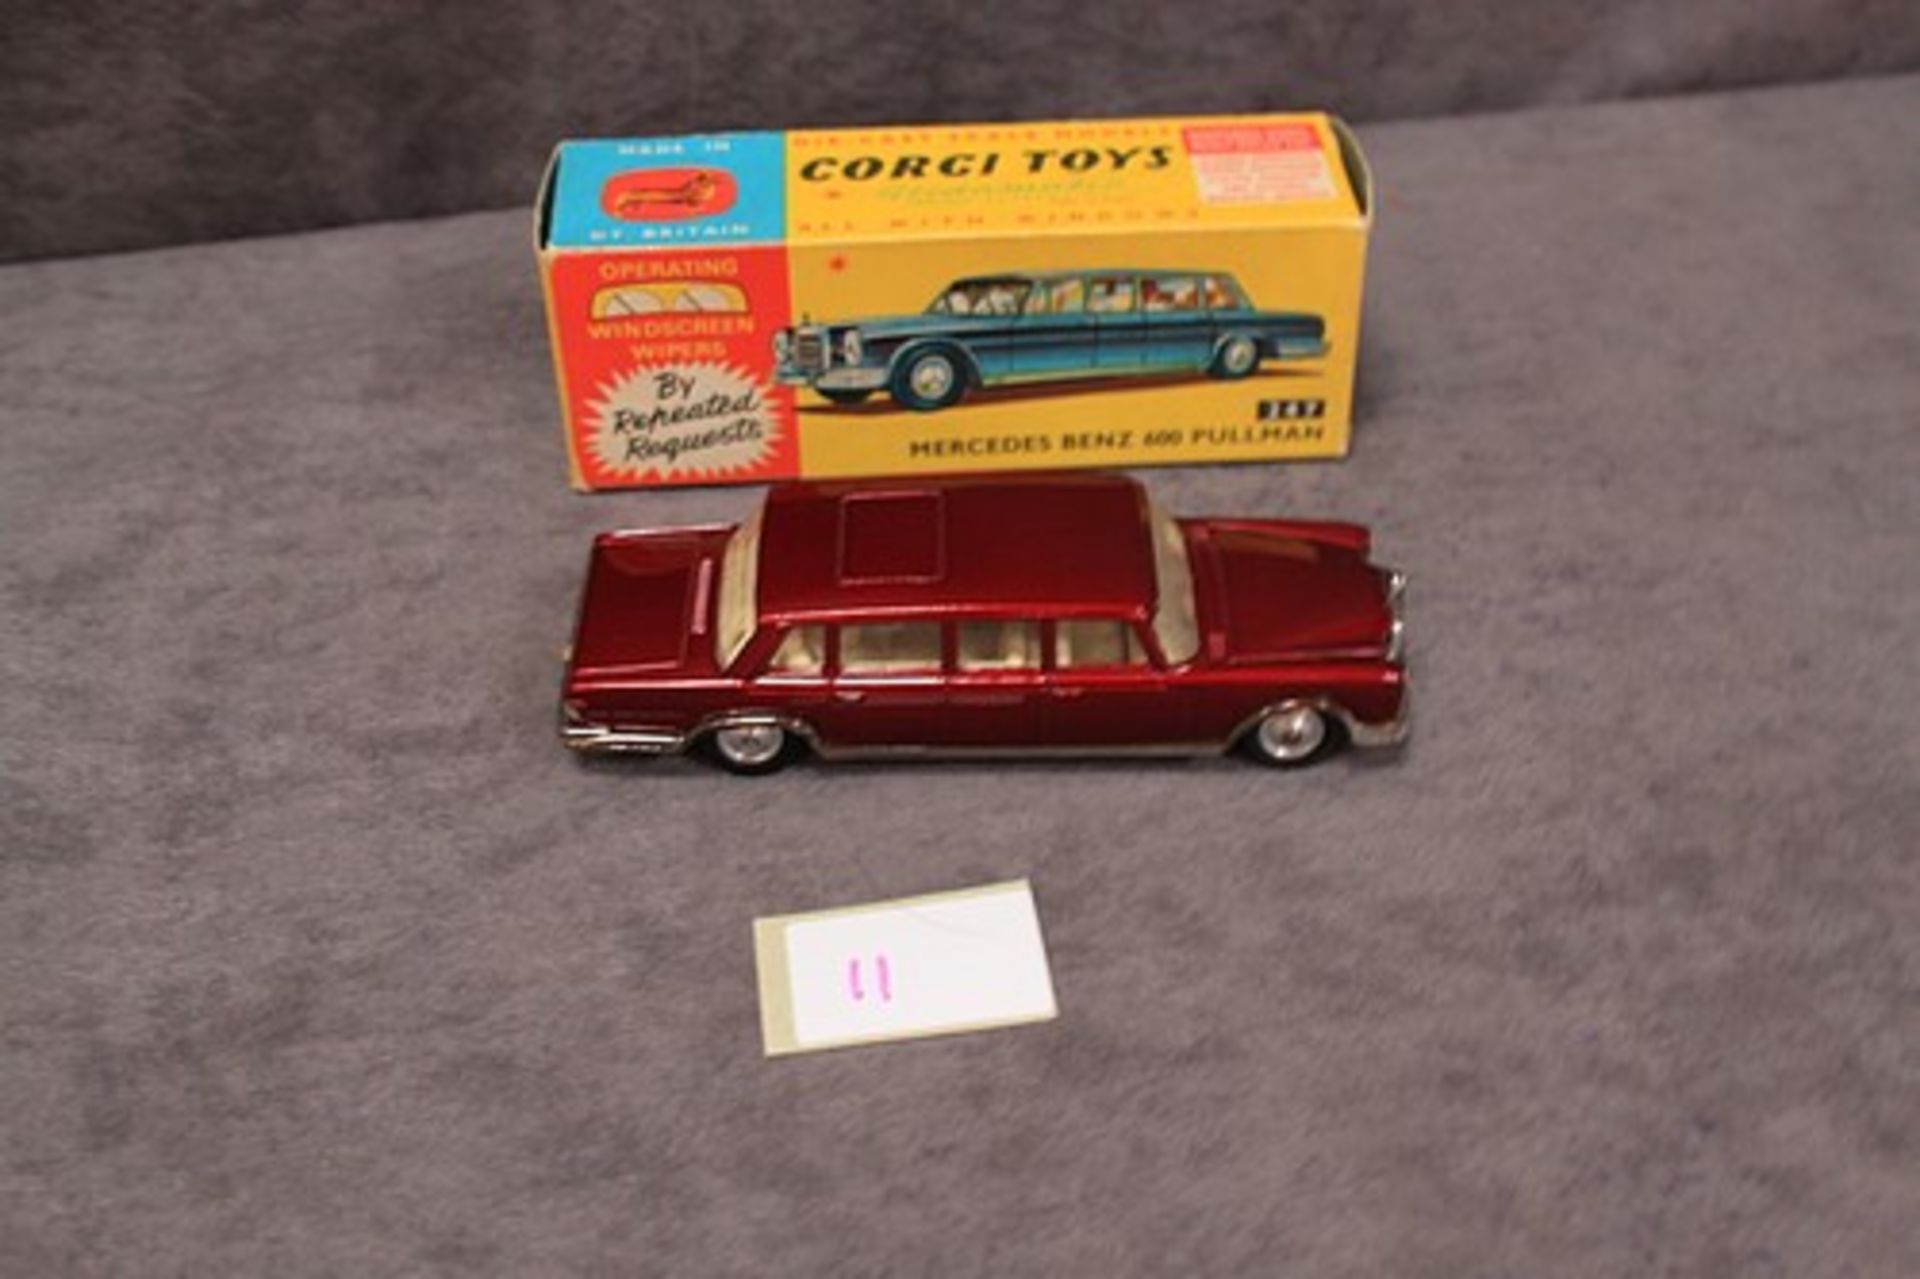 Mint Corgi Toys Diecast #247 Mercedes Benz 600 Pullman in Maroon with Silver Grill with leaflet in a - Image 2 of 2